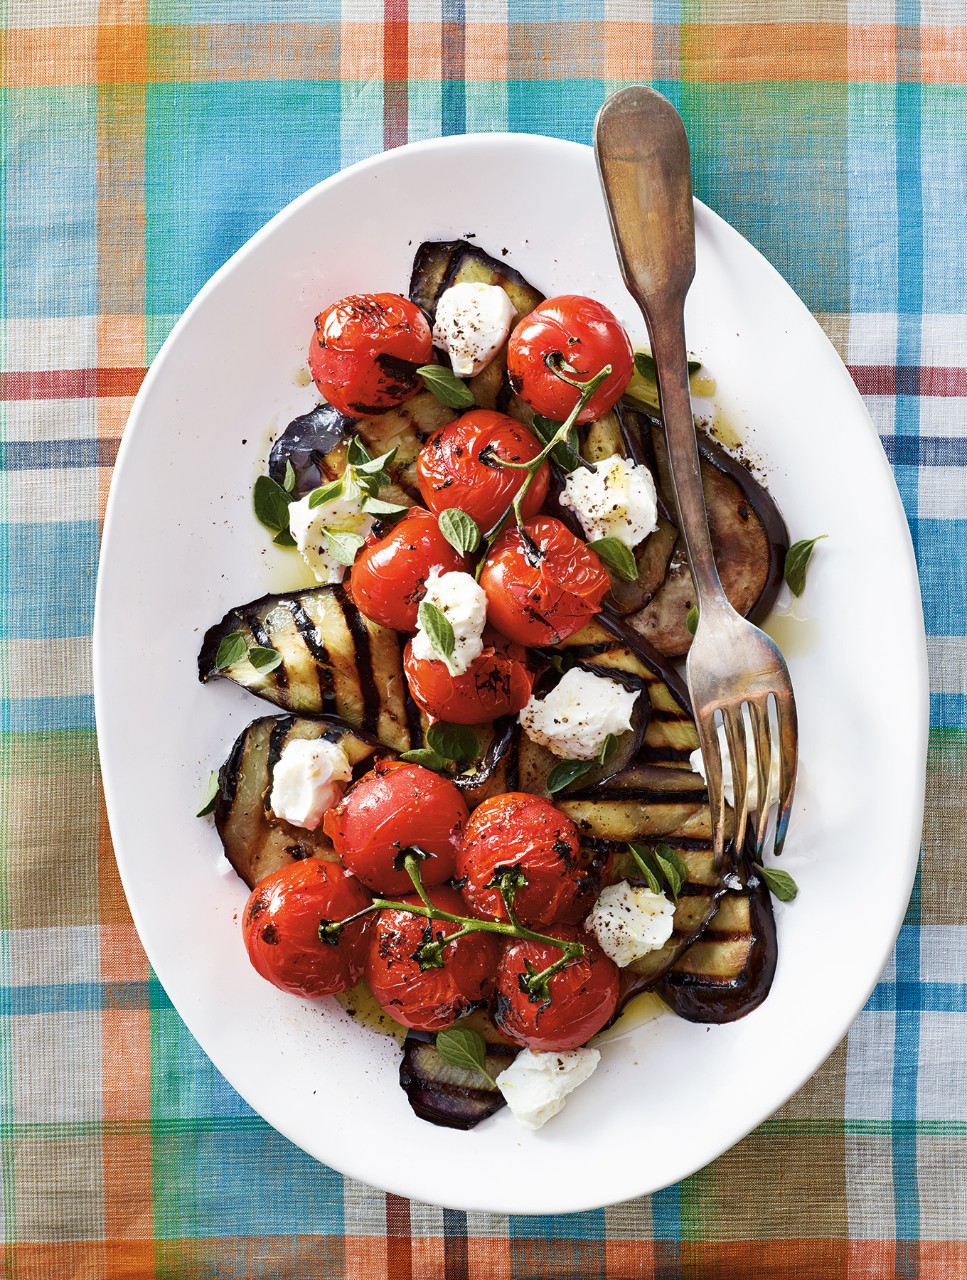 Grilled Eggplant & Tomatoes with Homemade Labneh